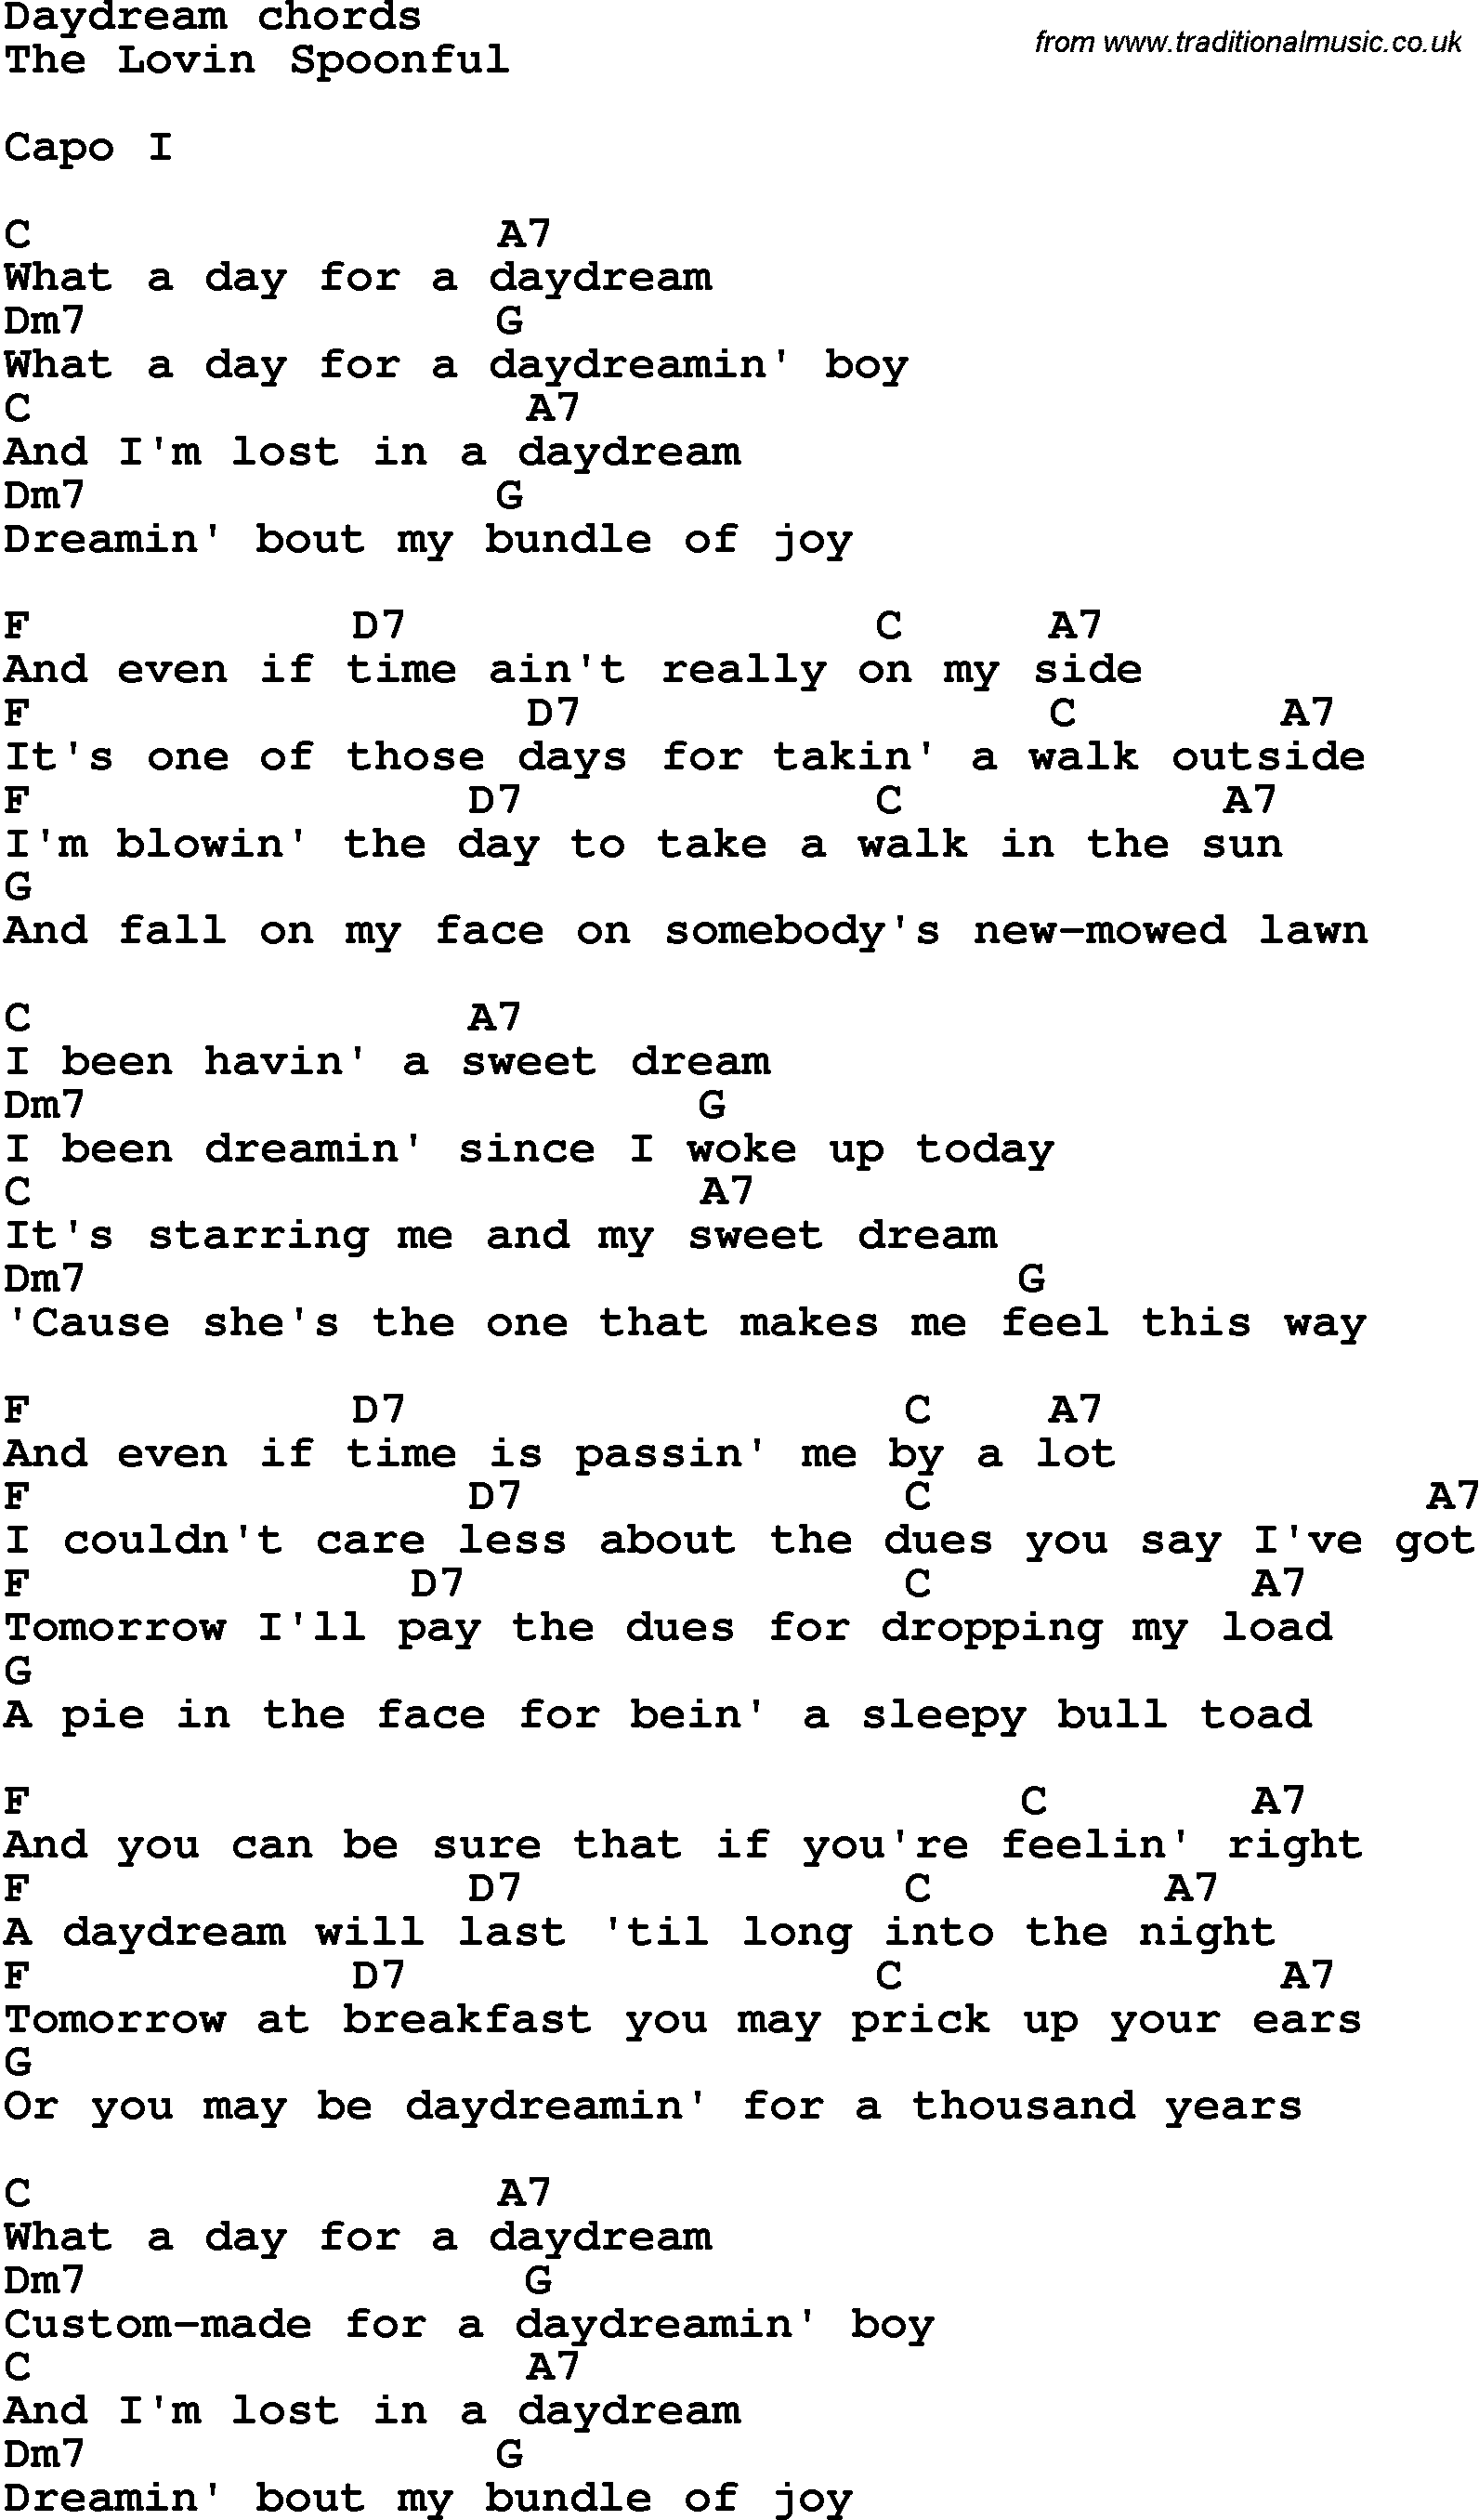 Song Lyrics with guitar chords for Daydream